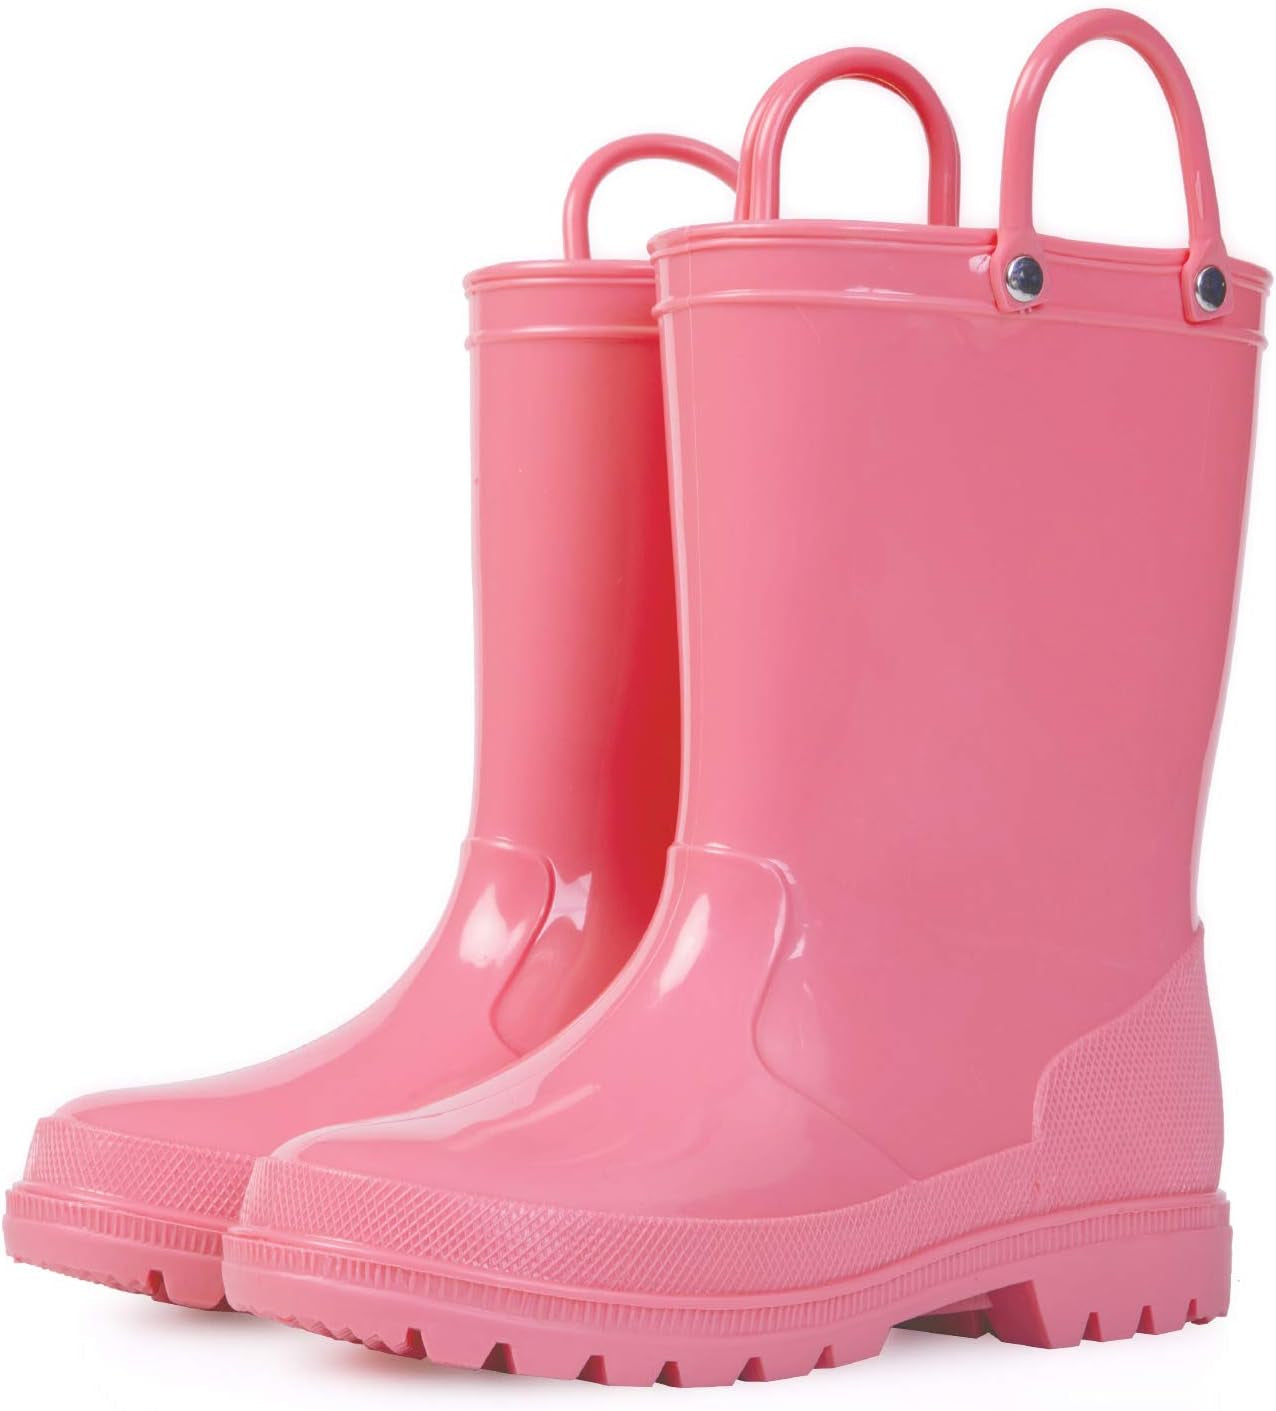 Kids Rain Boots, Toddler Girls & Boys Rain Boots Waterproof Memory Foam Insole and Easy-On Handles